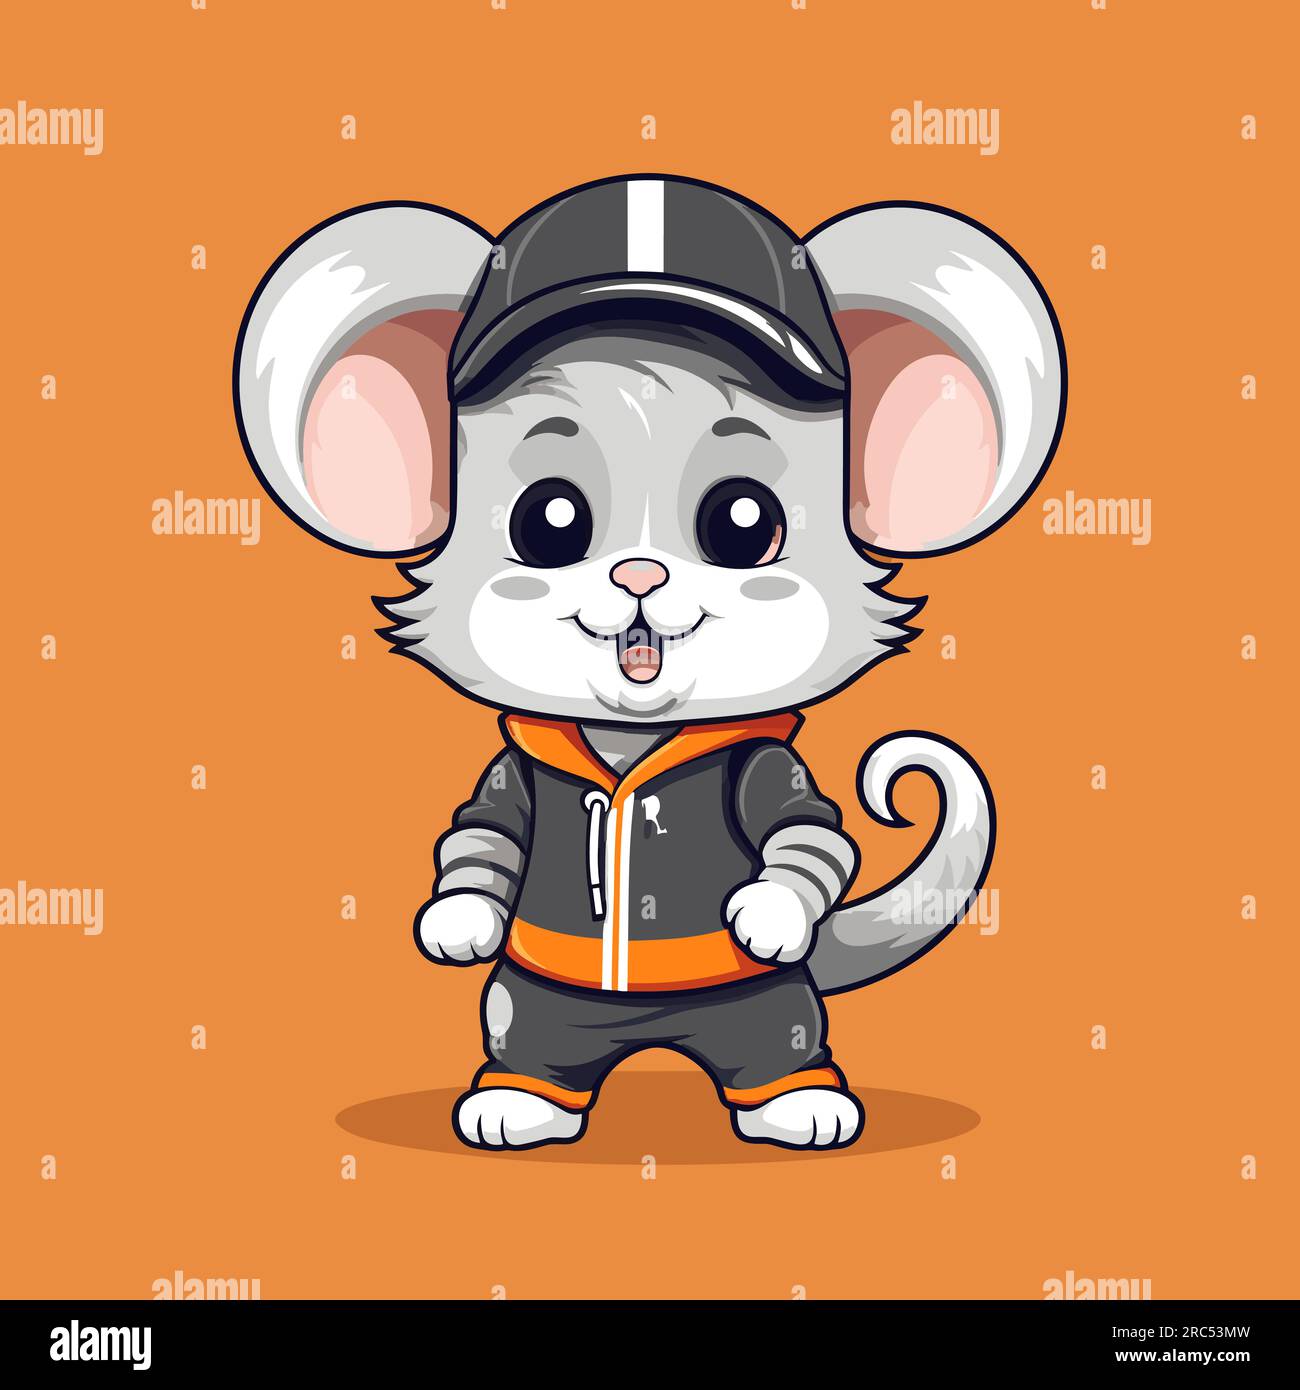 Cartoon mouse wearing baseball cap and black and orange hoodie. Stock Vector